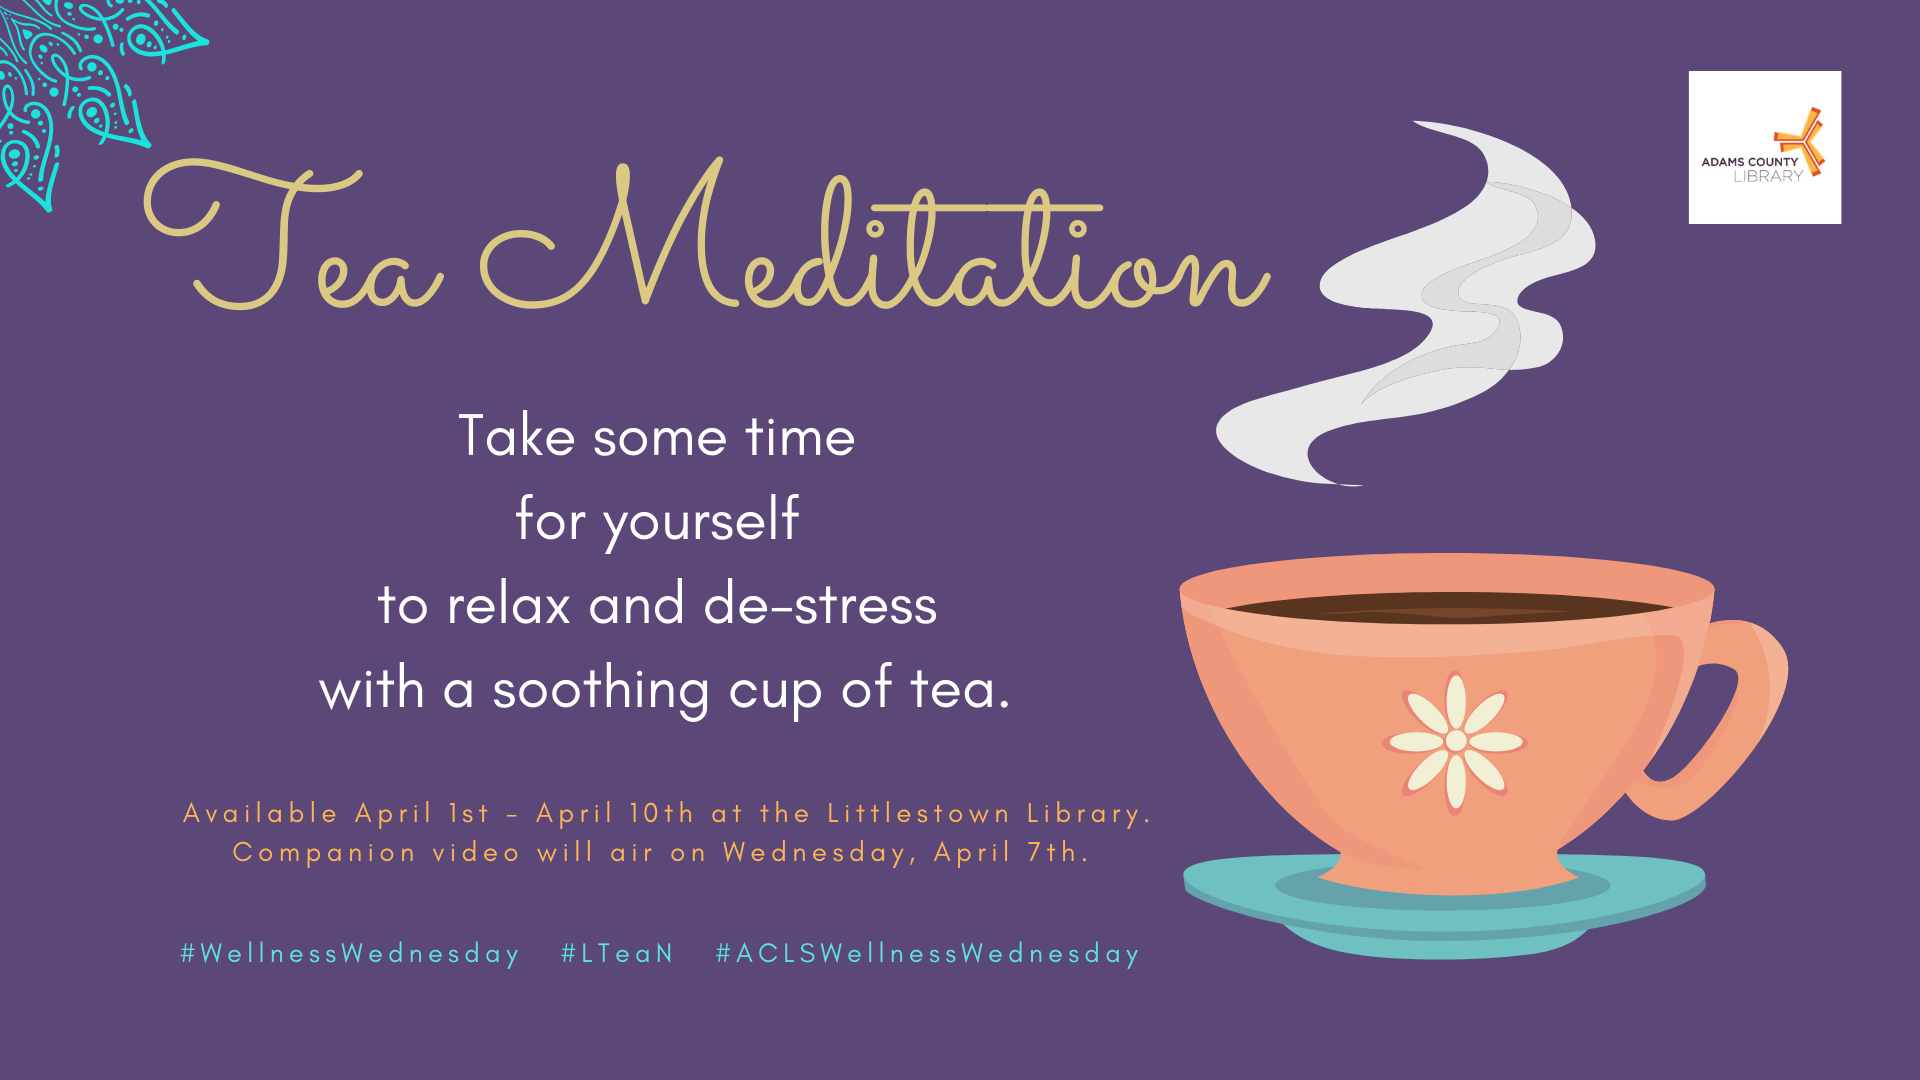 Tea Meditation April 1-April 10, 2021. Take some time for yourself to relax and de-stress with a soothing cup of tea. A companion video will be released on April 7th.